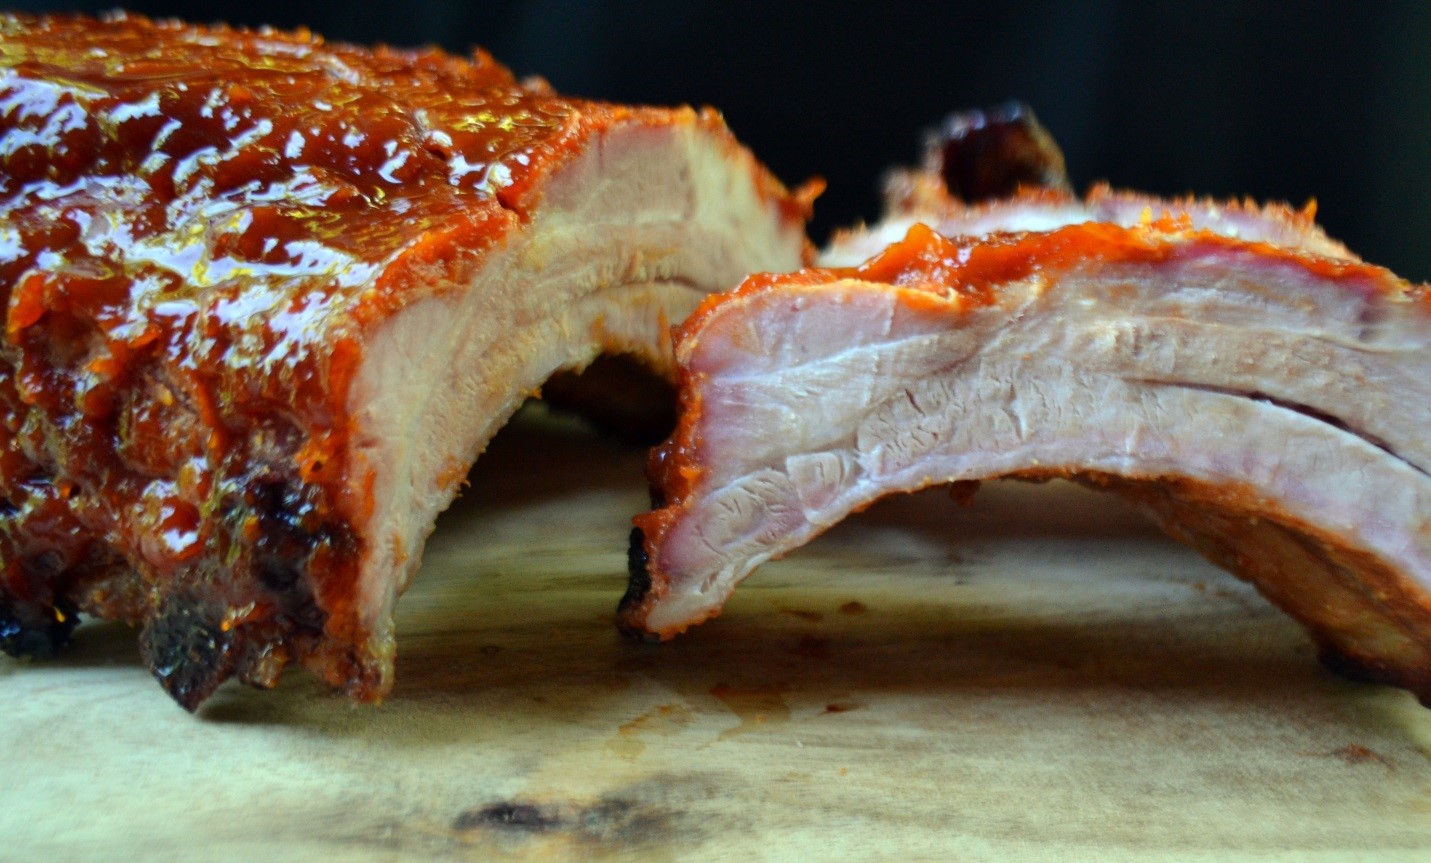 The Definitive Guide to Ribs